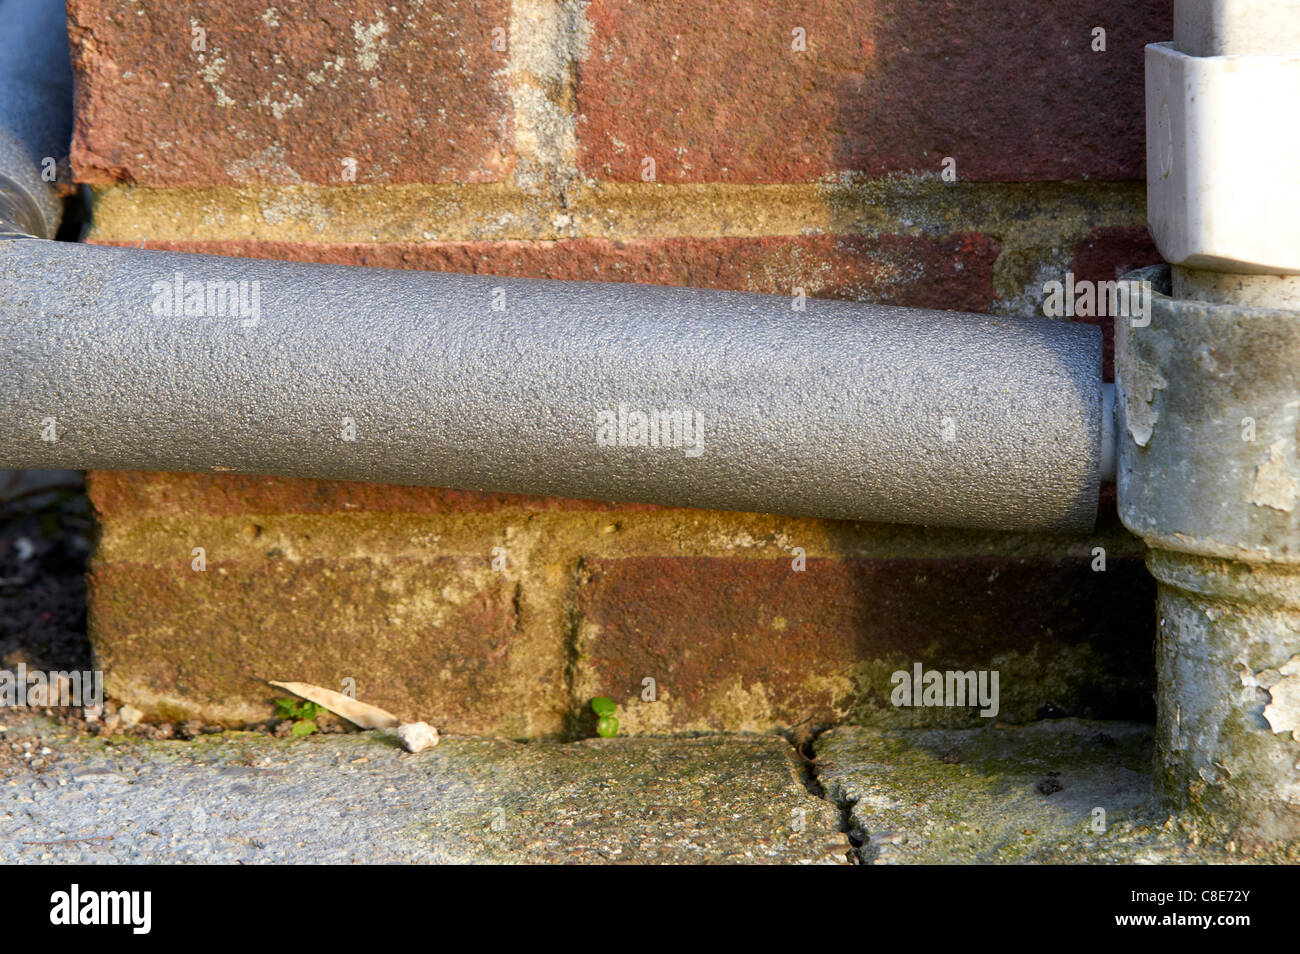 Condensate pipe from a condensing boiler lagged to prevent the pipe freezing up in cold winter conditions. Stock Photo